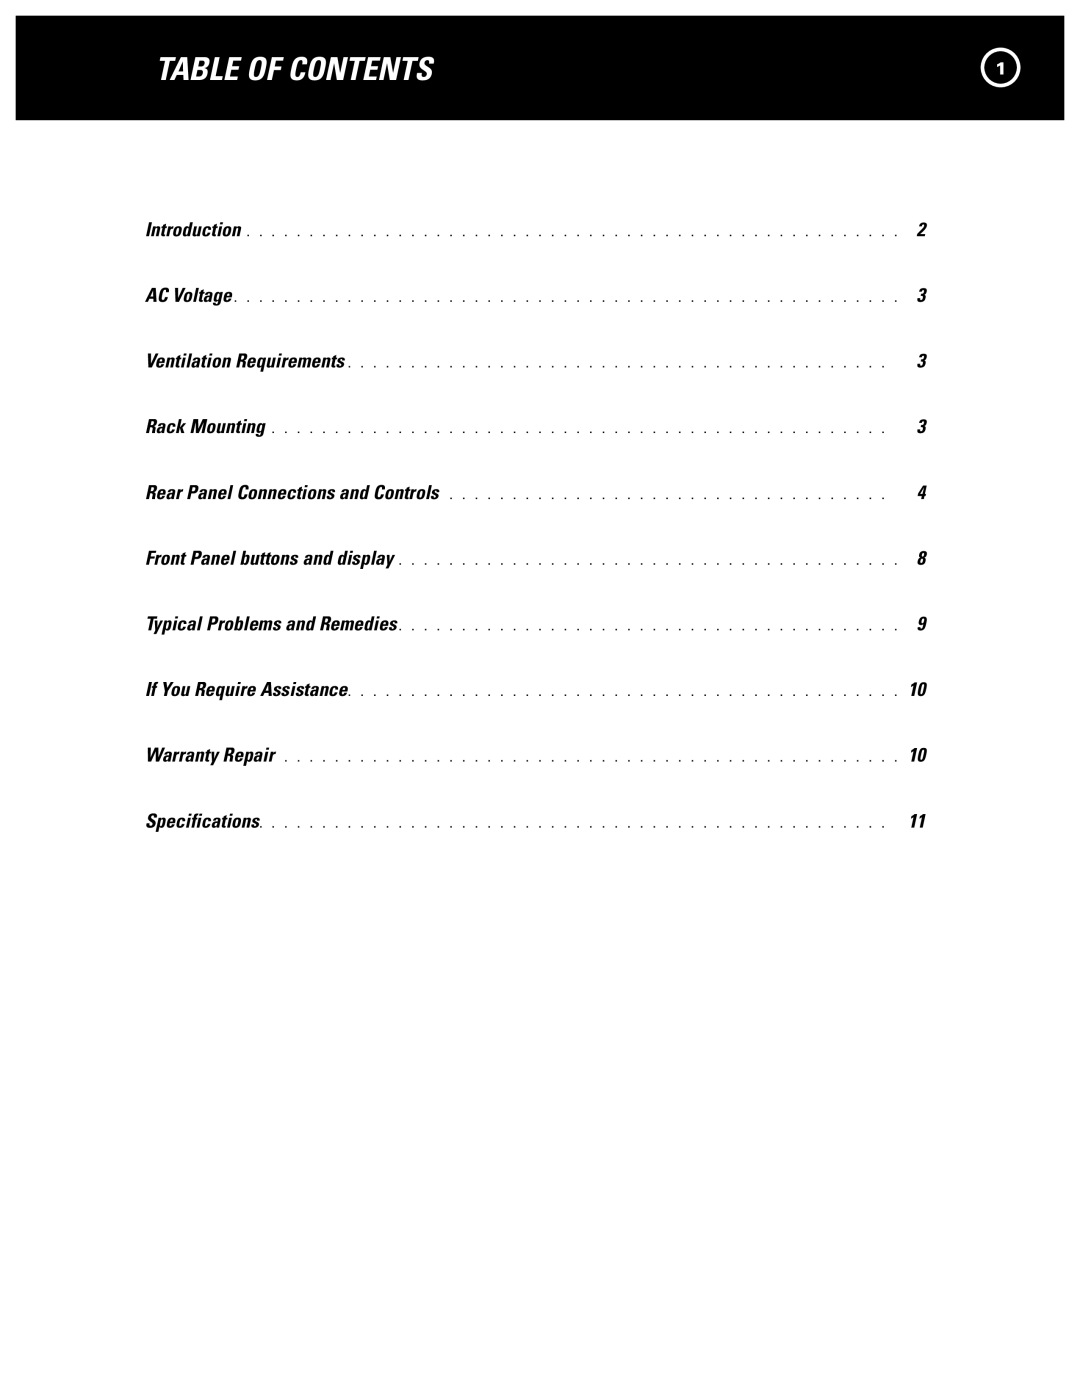 Parasound 5250 V.2 manual Table Of Contents 